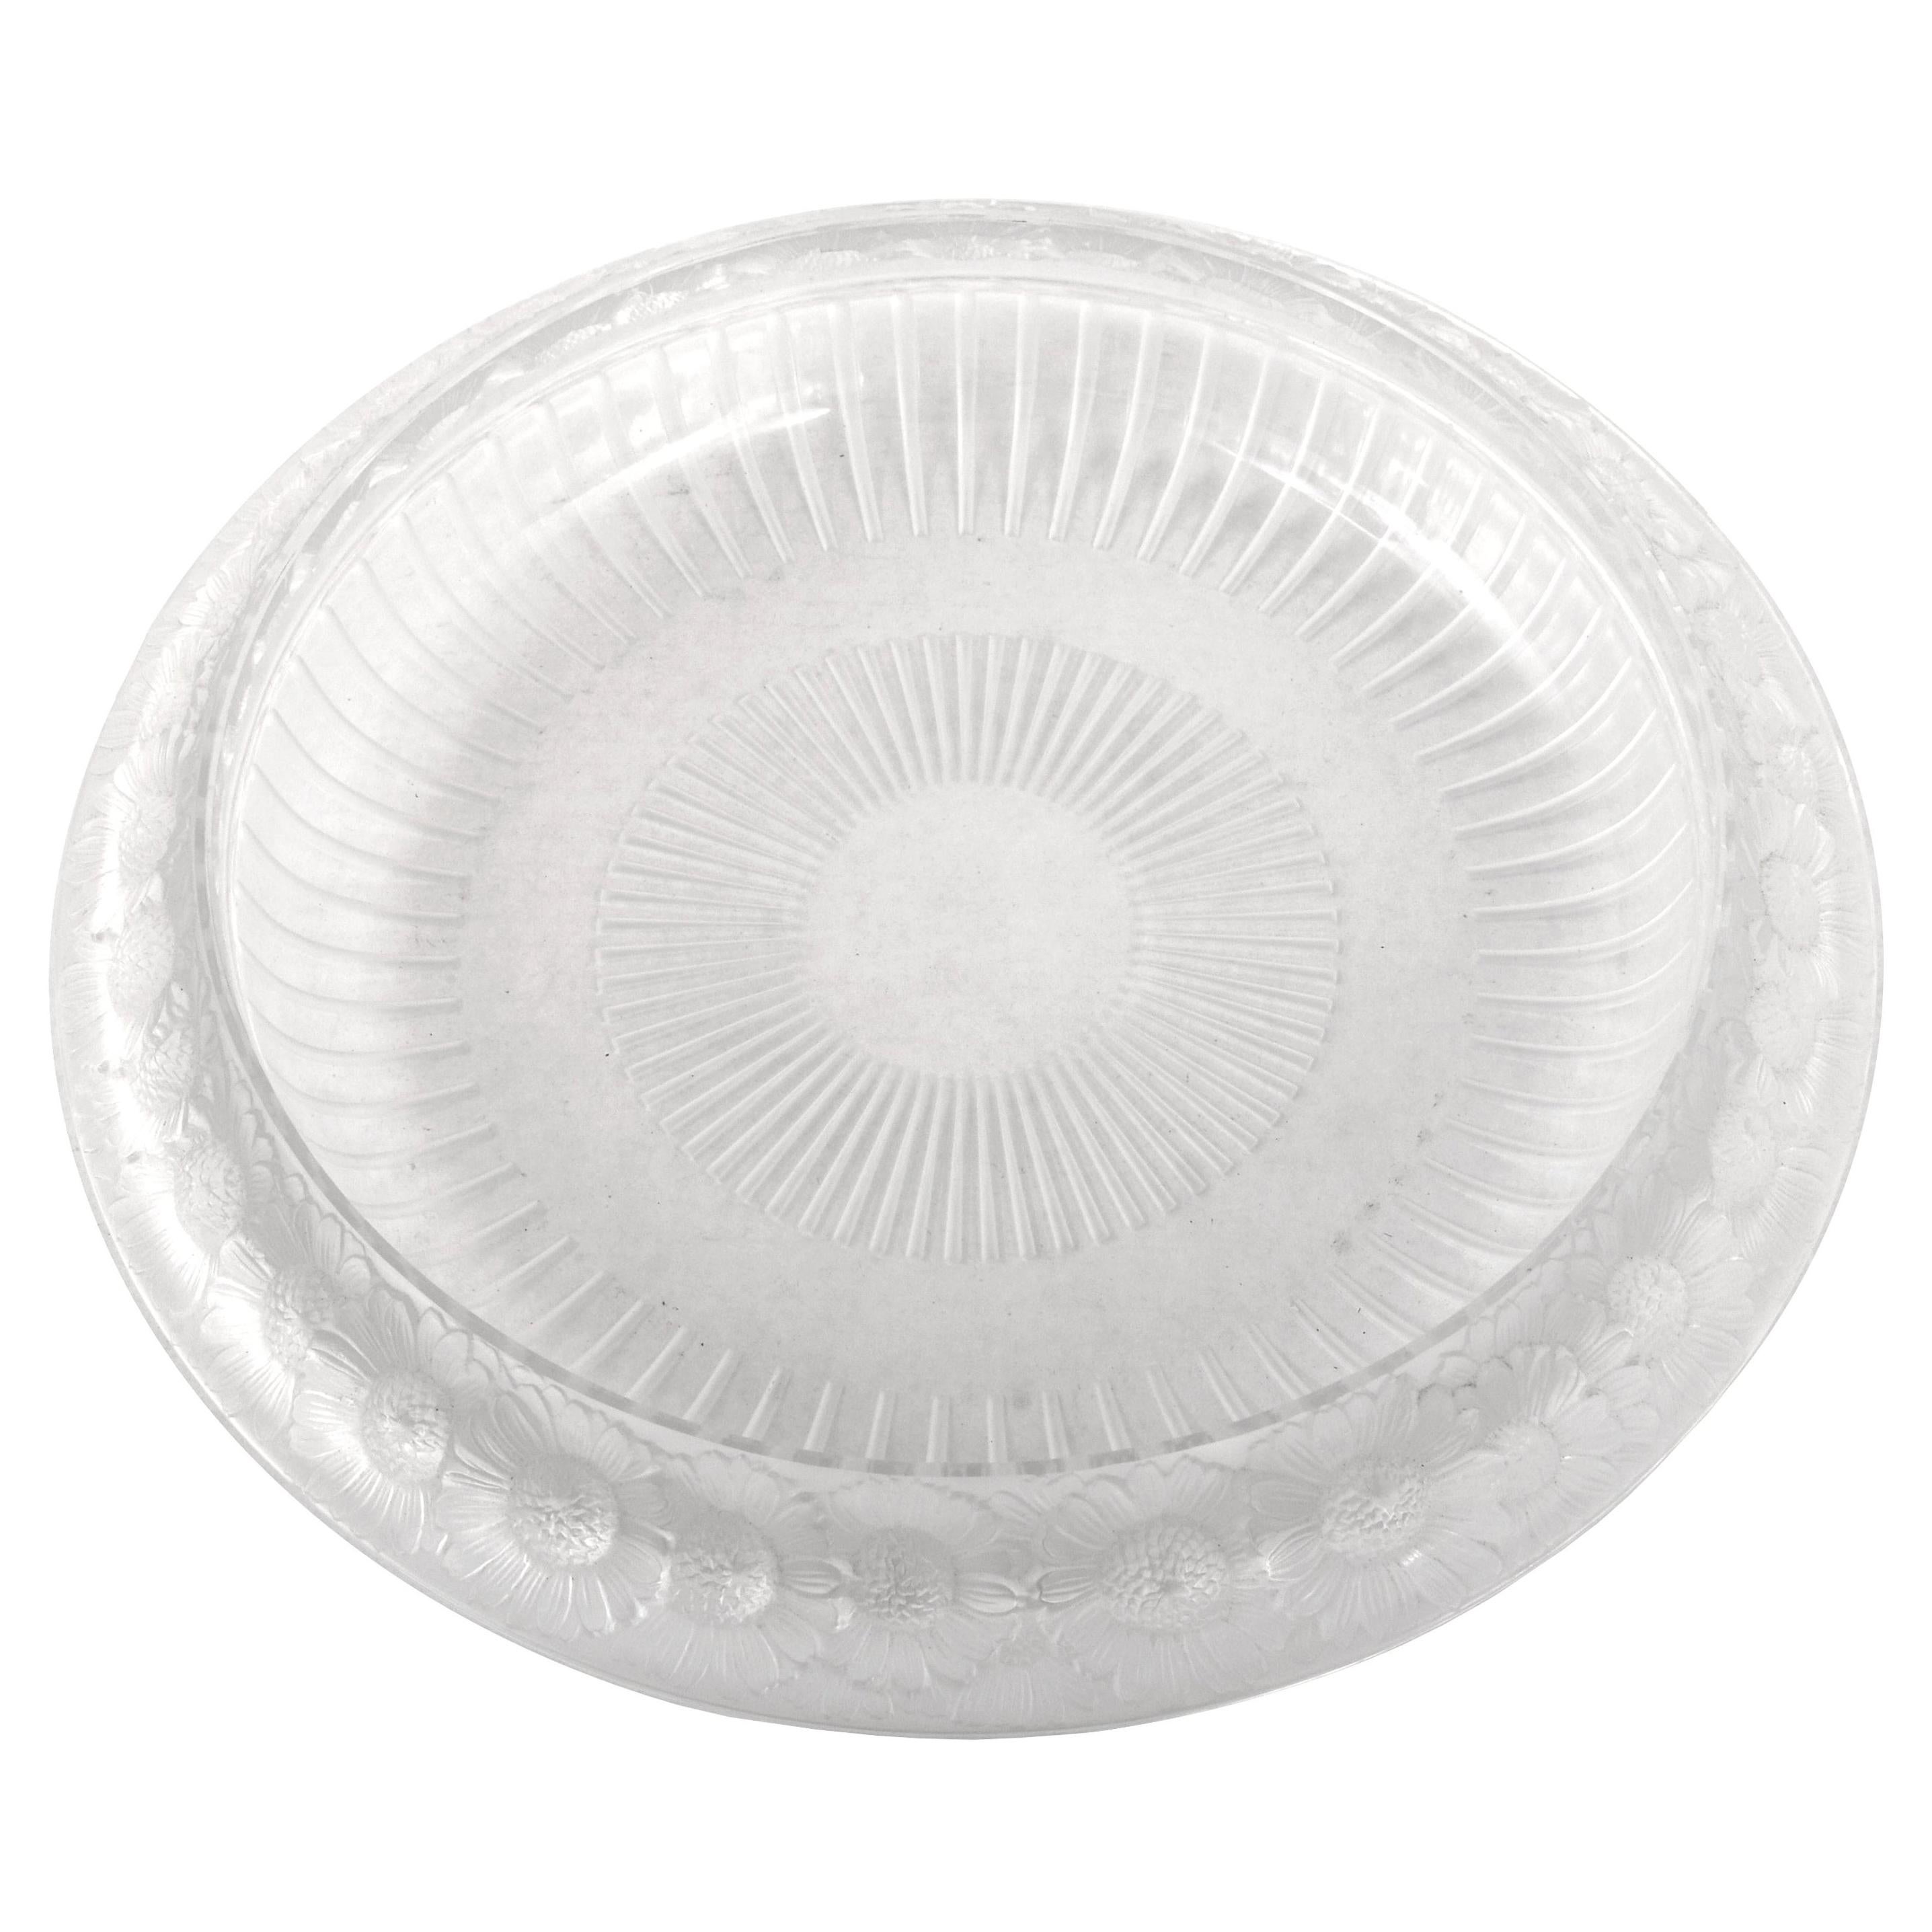 Antique French Art Deco Large Crystal Glass "Marguerites" Bowl by Lalique, 1930s For Sale